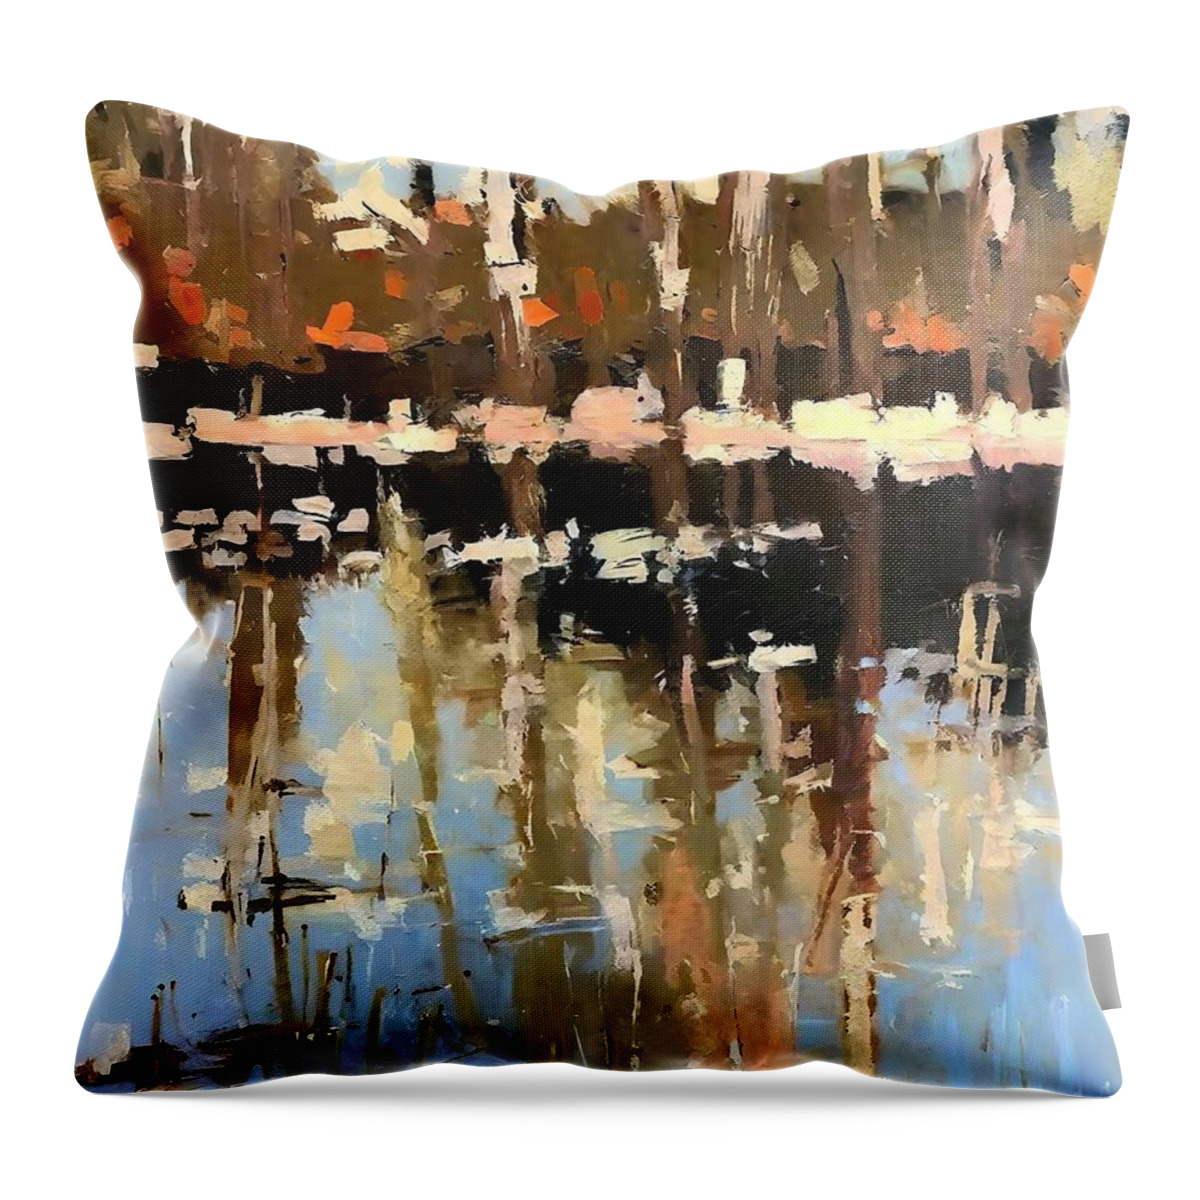 Australia Throw Pillow featuring the painting Stringybark Jetty Painting Australia stringbark abstract landscape red green light abstract art autumn background beauty brush brushstroke canvas color colorful creative decor design drawing drips by N Akkash